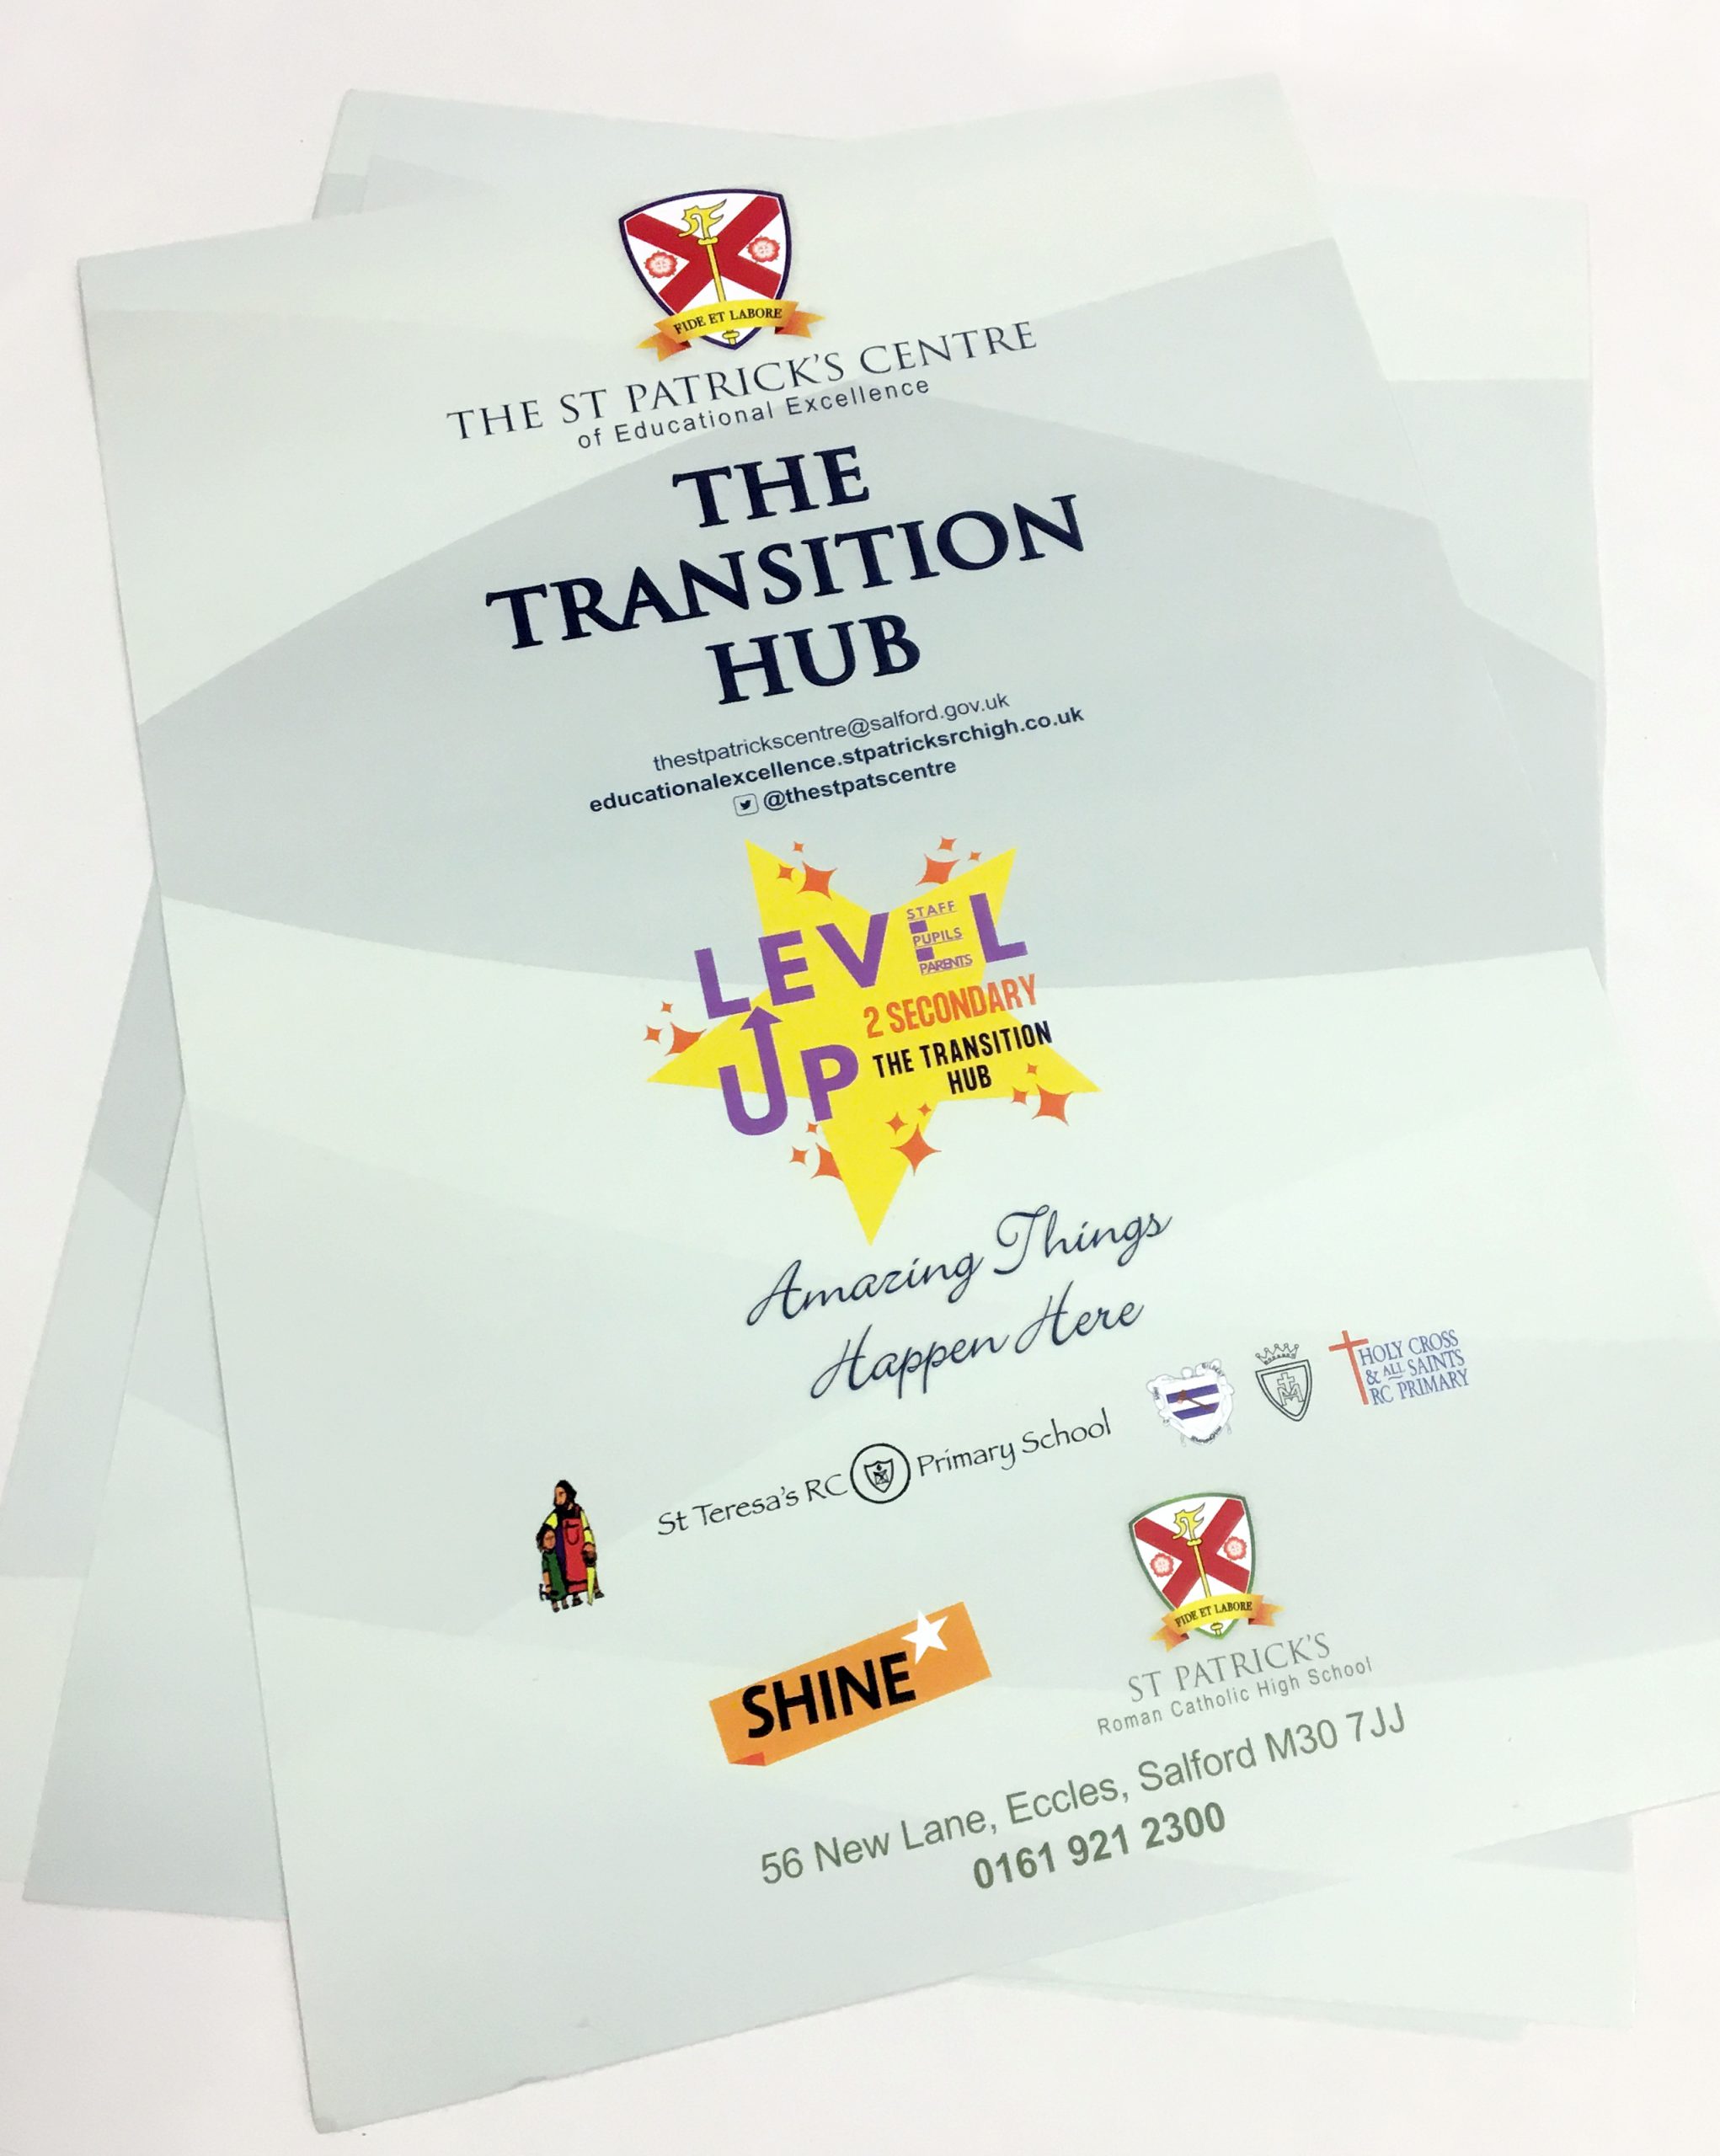 A flyer at the launch of the Transition Hub